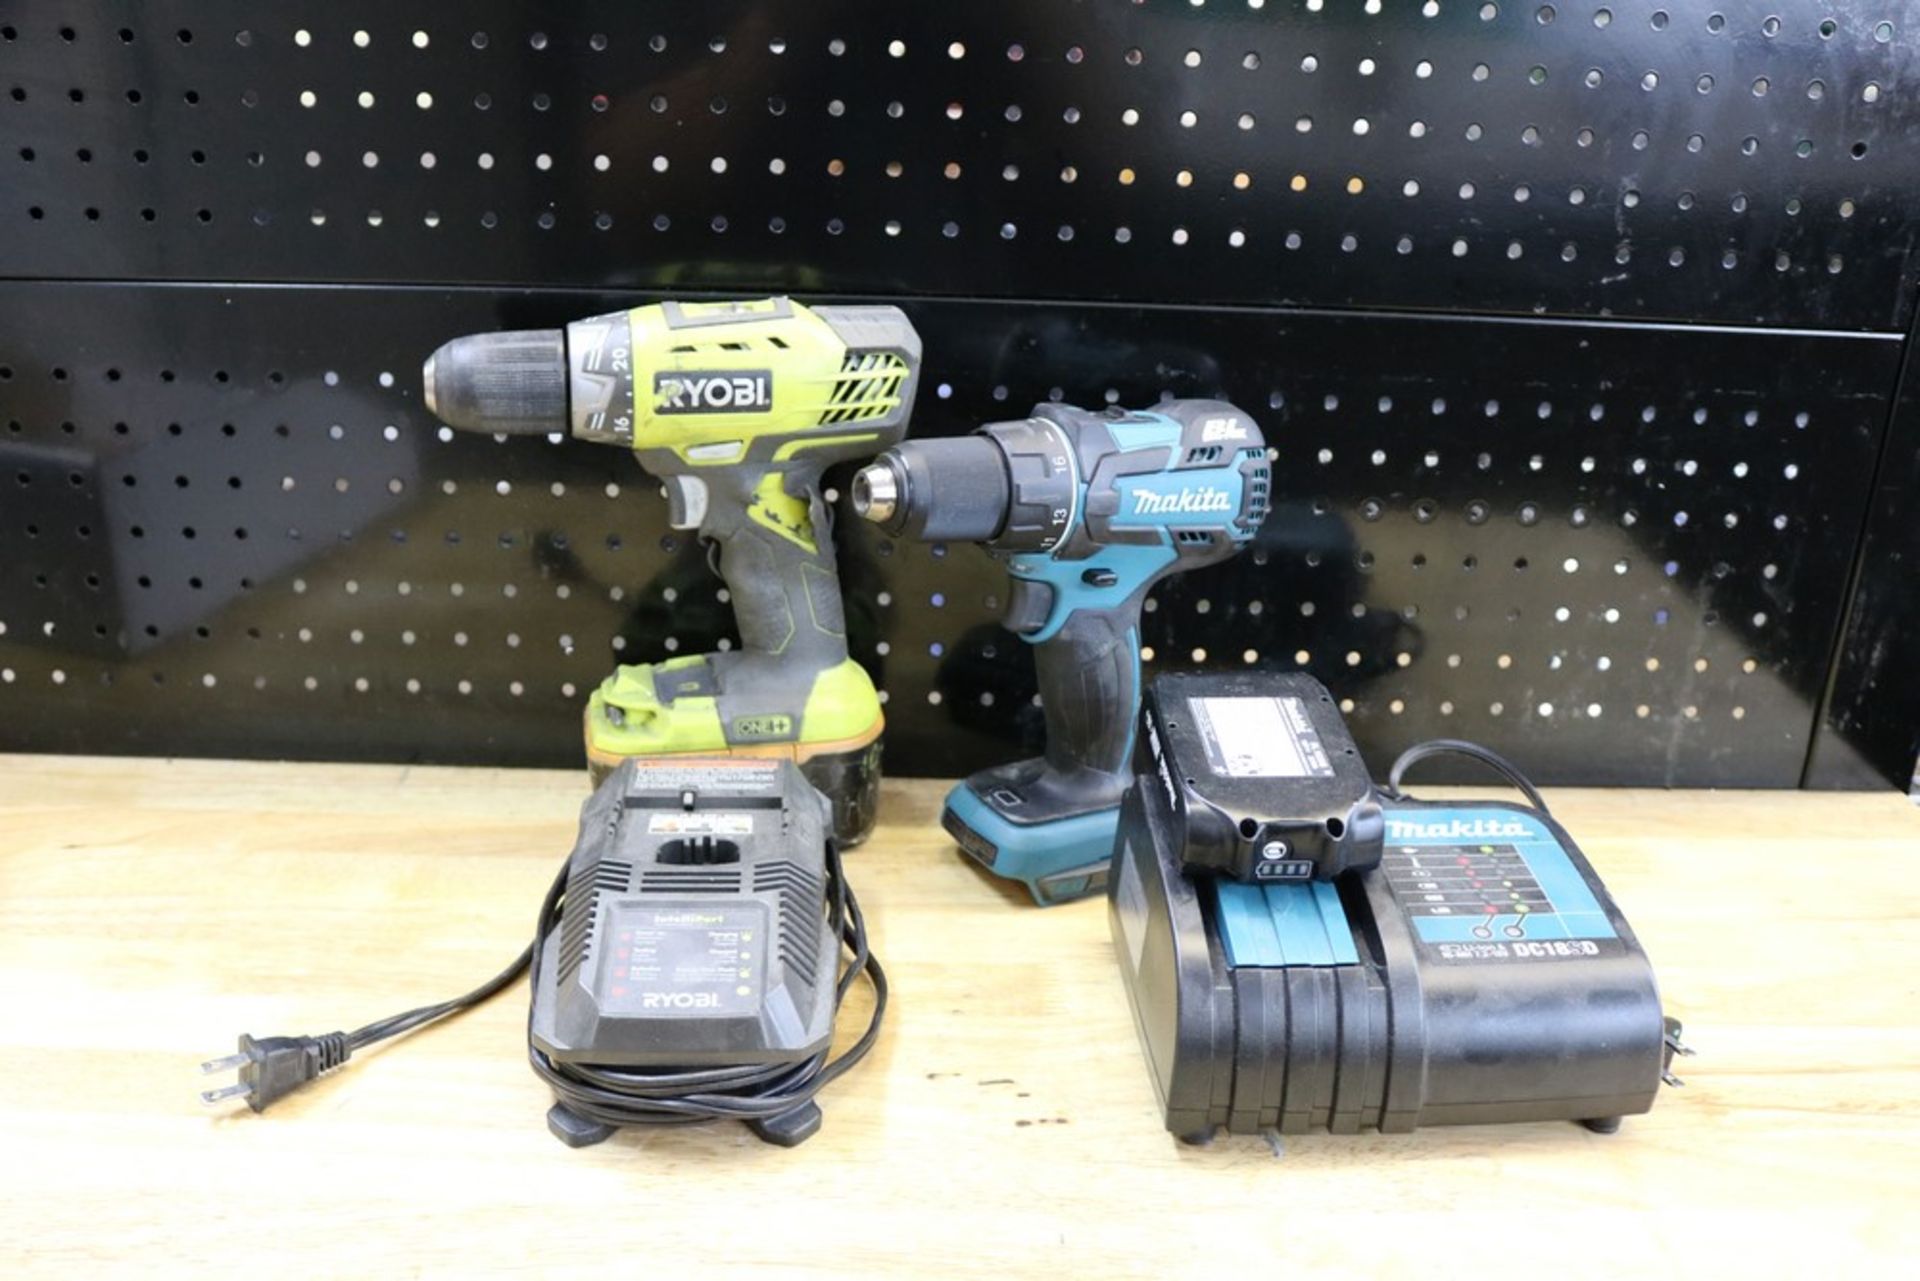 Makita XFD06 Cordelss Drill 18V with Battery and Charger, Ryobi 18v Cordless Drill with Battery